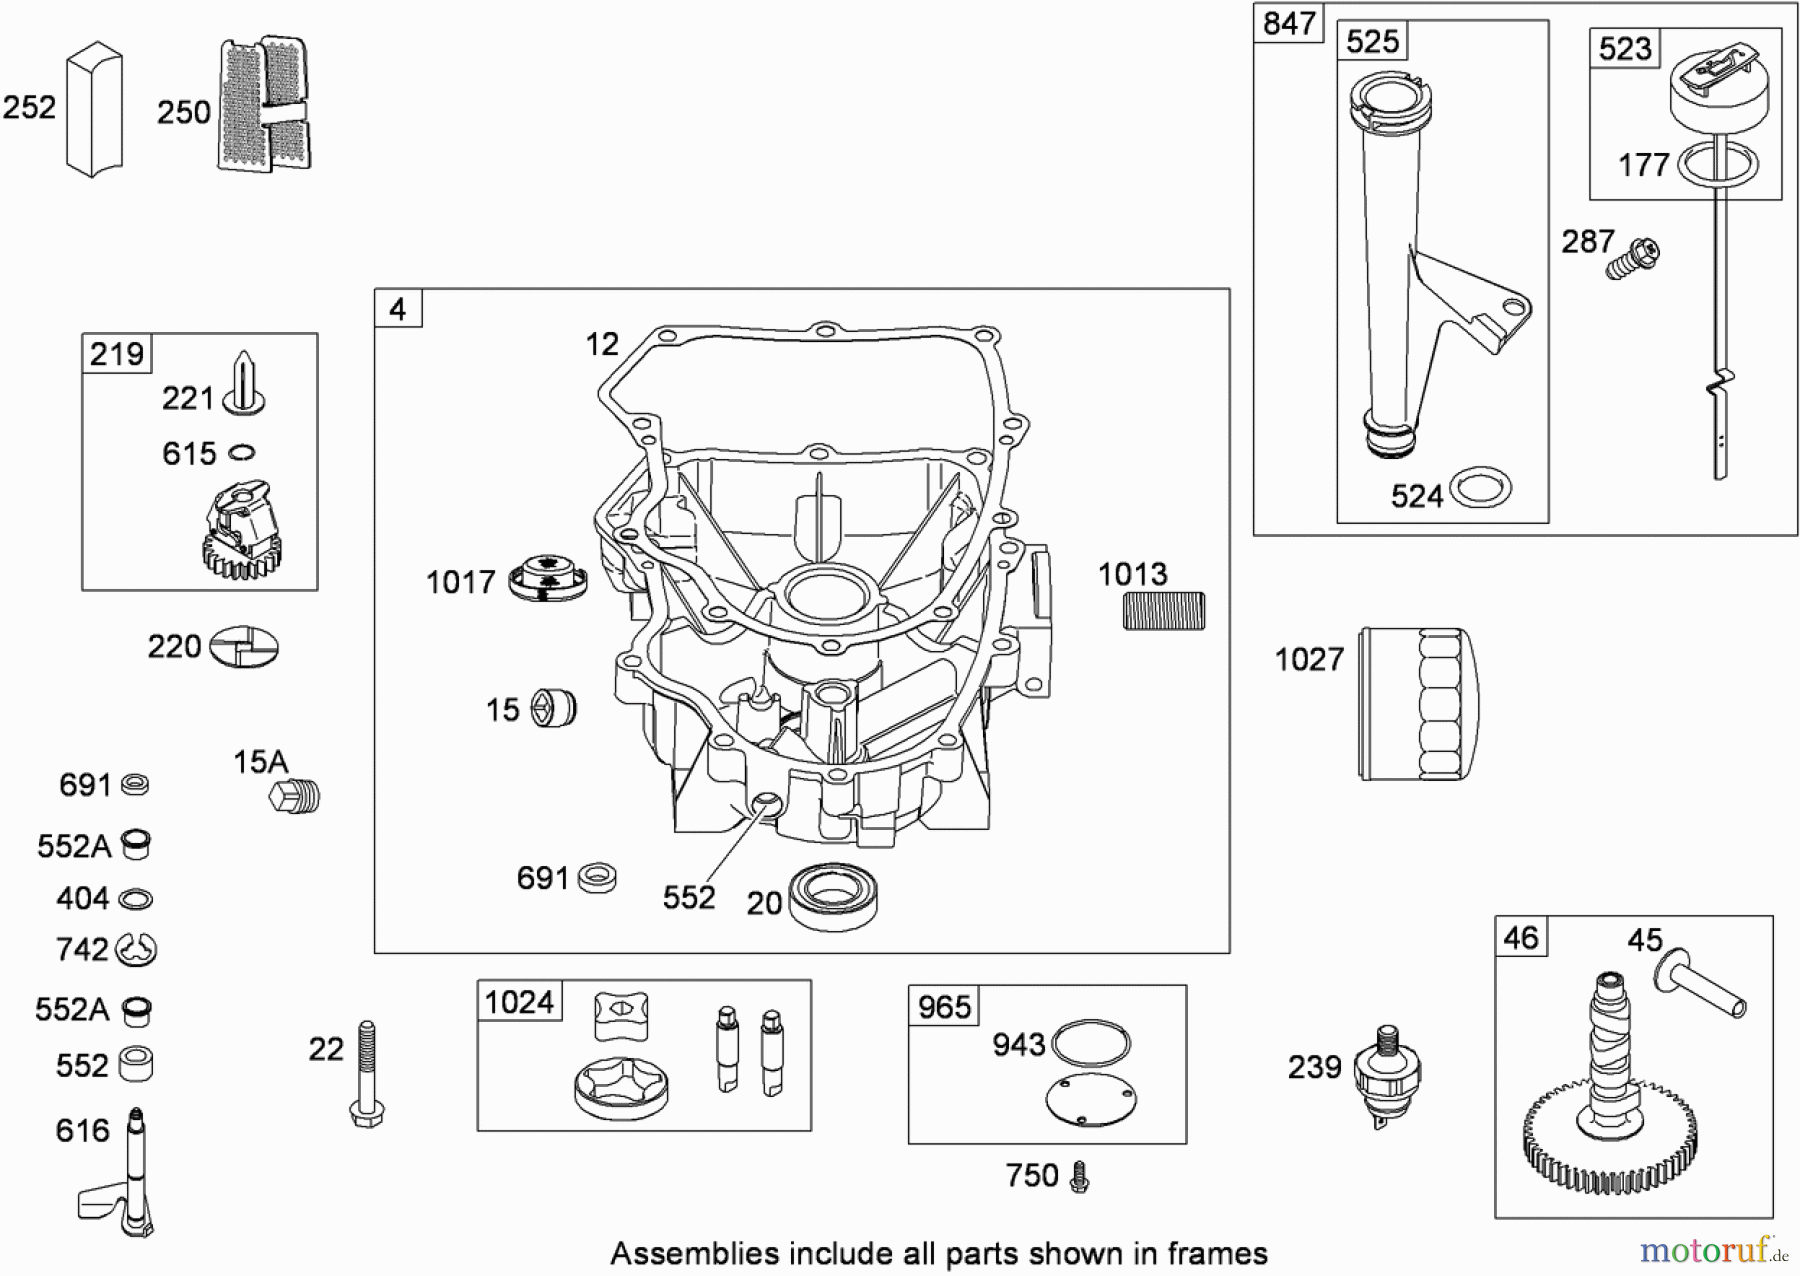  Toro Neu Mowers, Lawn & Garden Tractor Seite 1 13AT61RH544 (LX466) - Toro LX466 Lawn Tractor, 2008 (SN 1-) CRANKCASE, COVER AND ENGINE SUMP ASSEMBLY BRIGGS AND STRATTON 407777-0550-B1